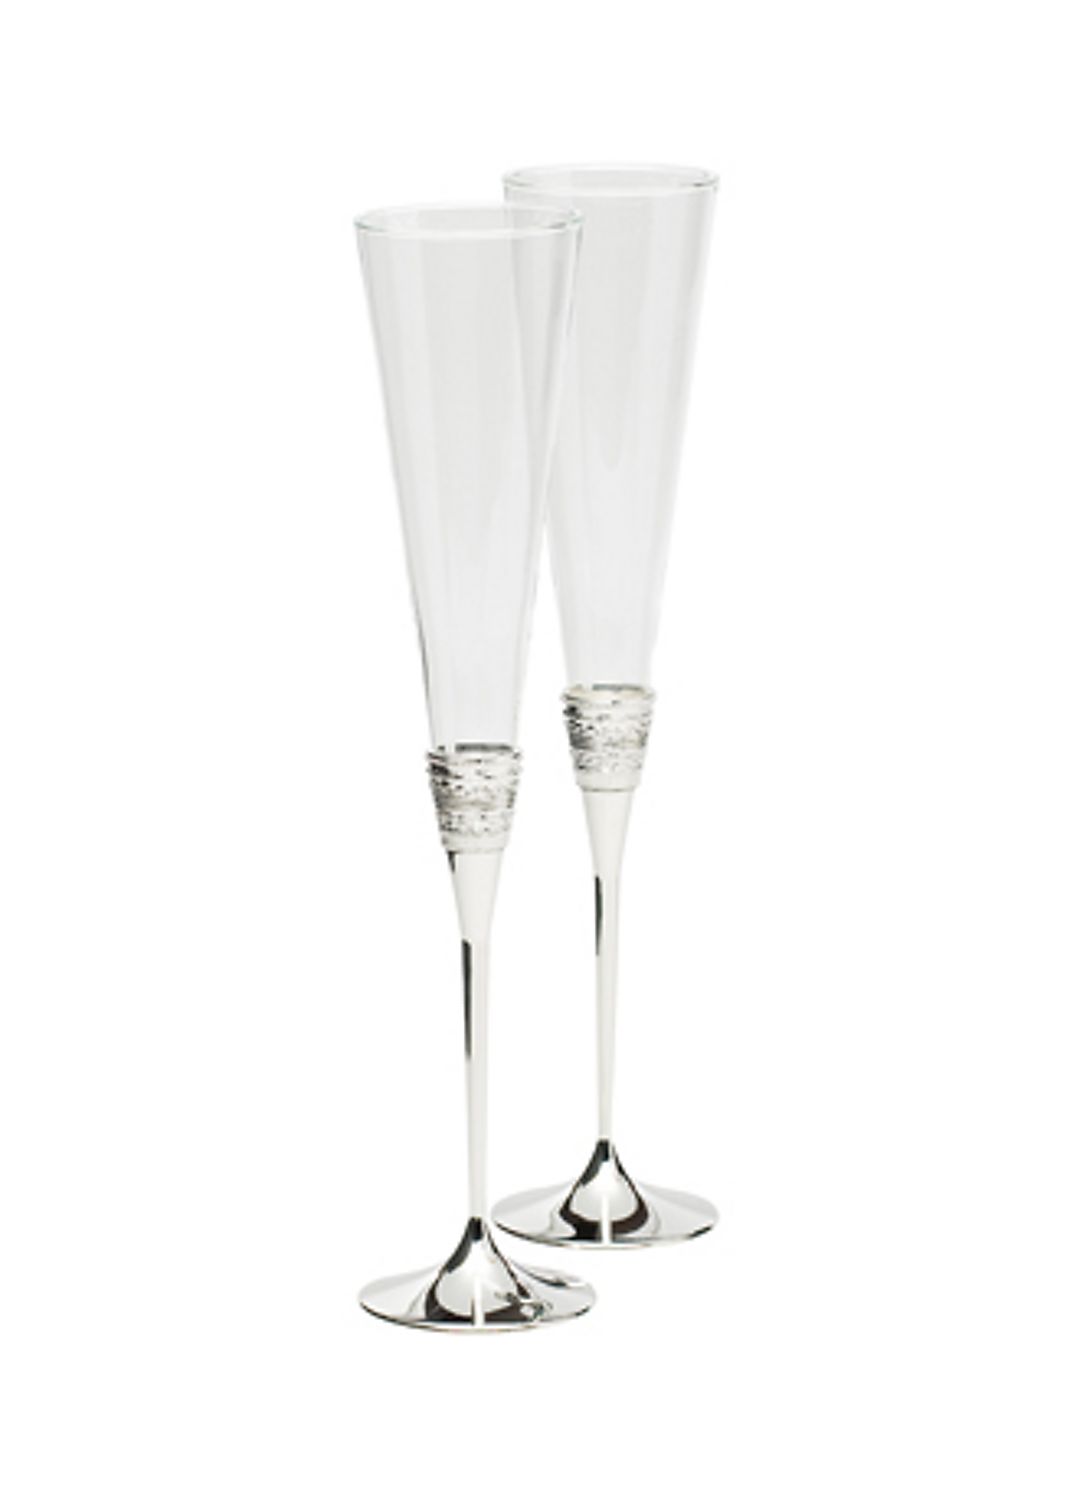 Vera Wang Silverplate With Love Toasting Flute Set Image 1